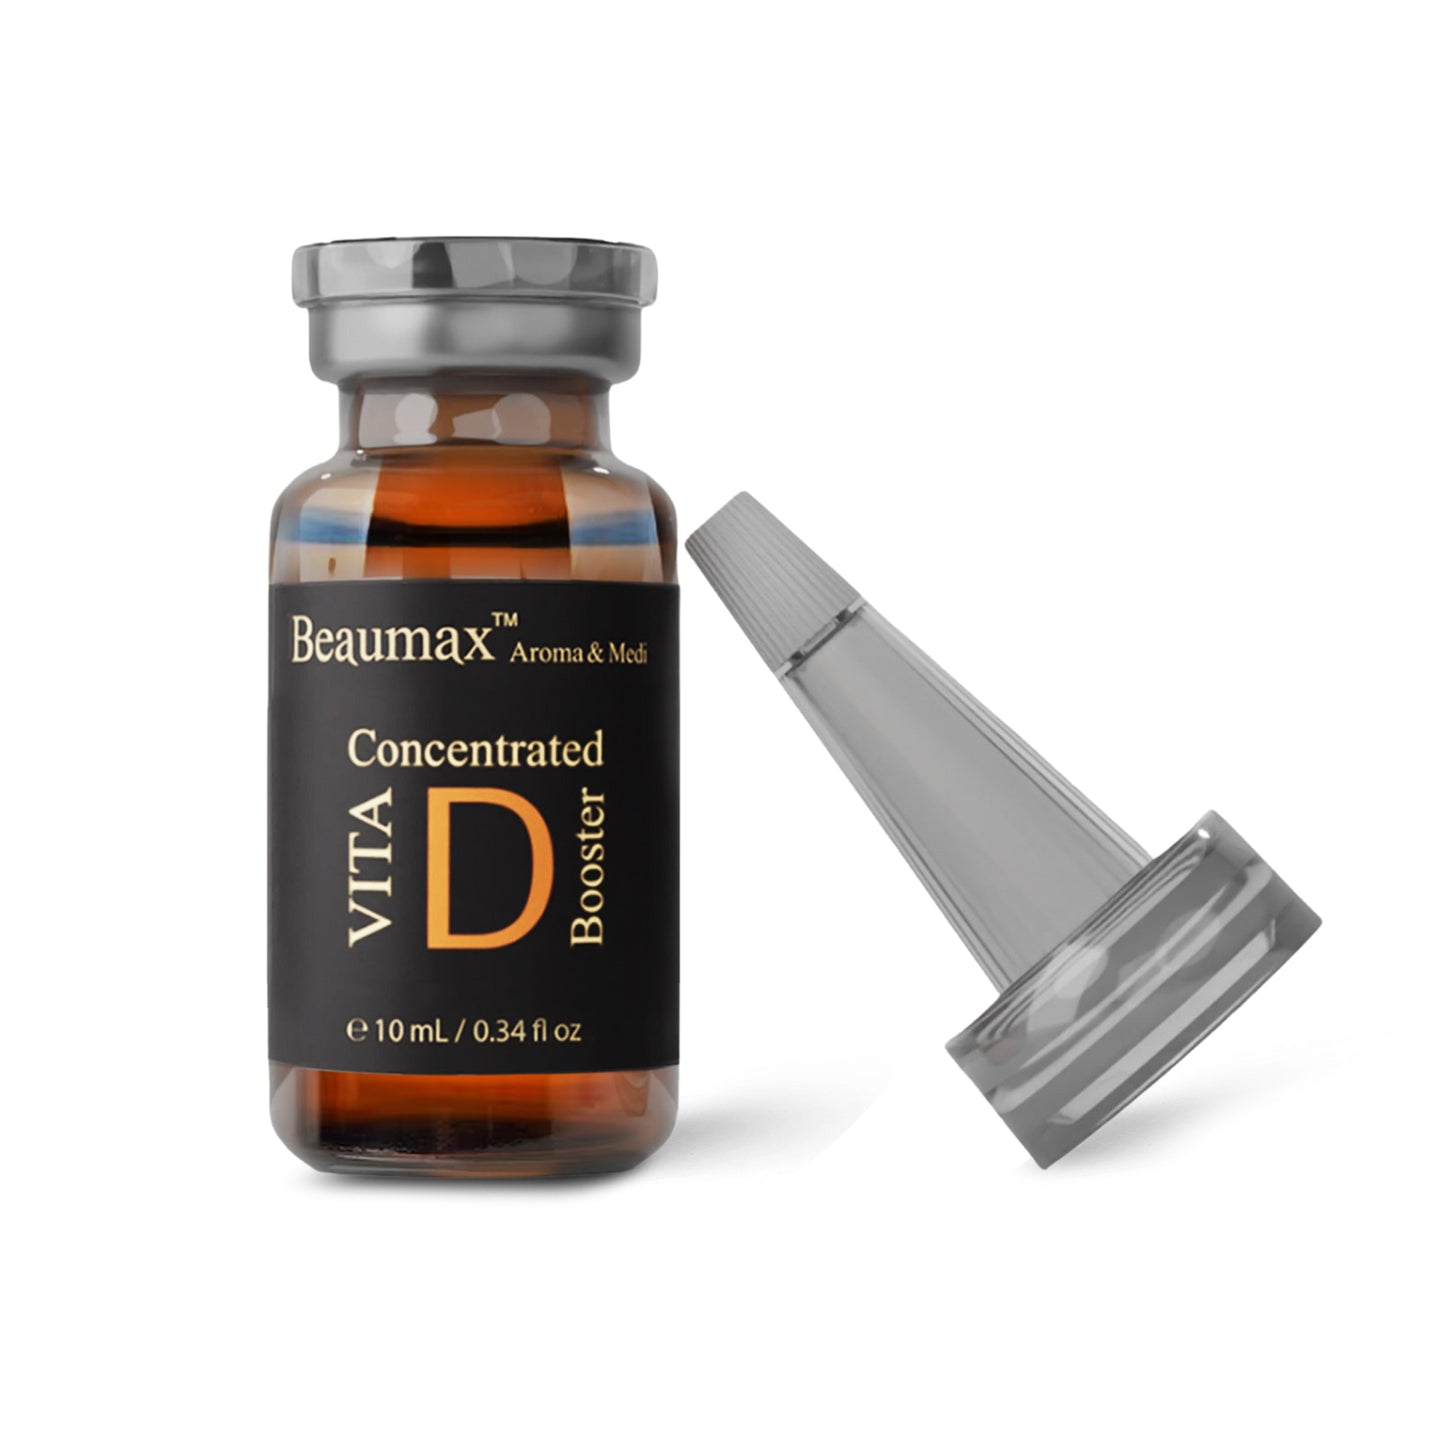 Concentrated Vita-D Booster 10ml